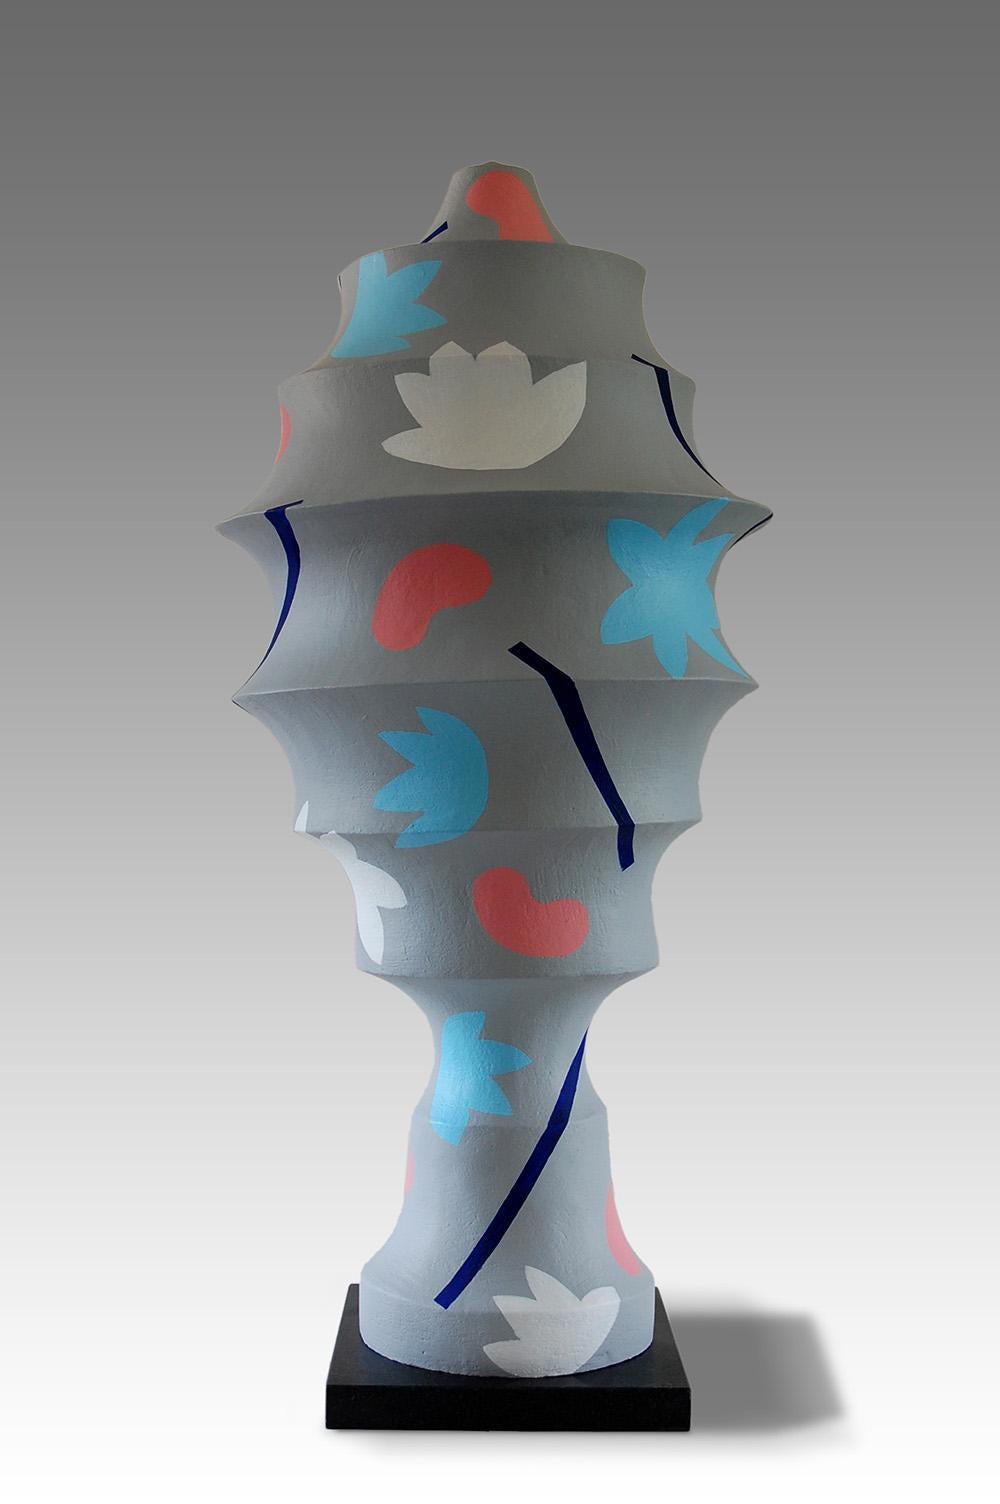 Twilight is a unique painted fired clay mounted on granite sculpture by contemporary artist Patricia Volk, dimensions are 93 × 40 × 40 cm
(36.6 × 15.7 × 15.7 in). 
The sculpture is signed and comes with a certificate of authenticity. 

Abstract